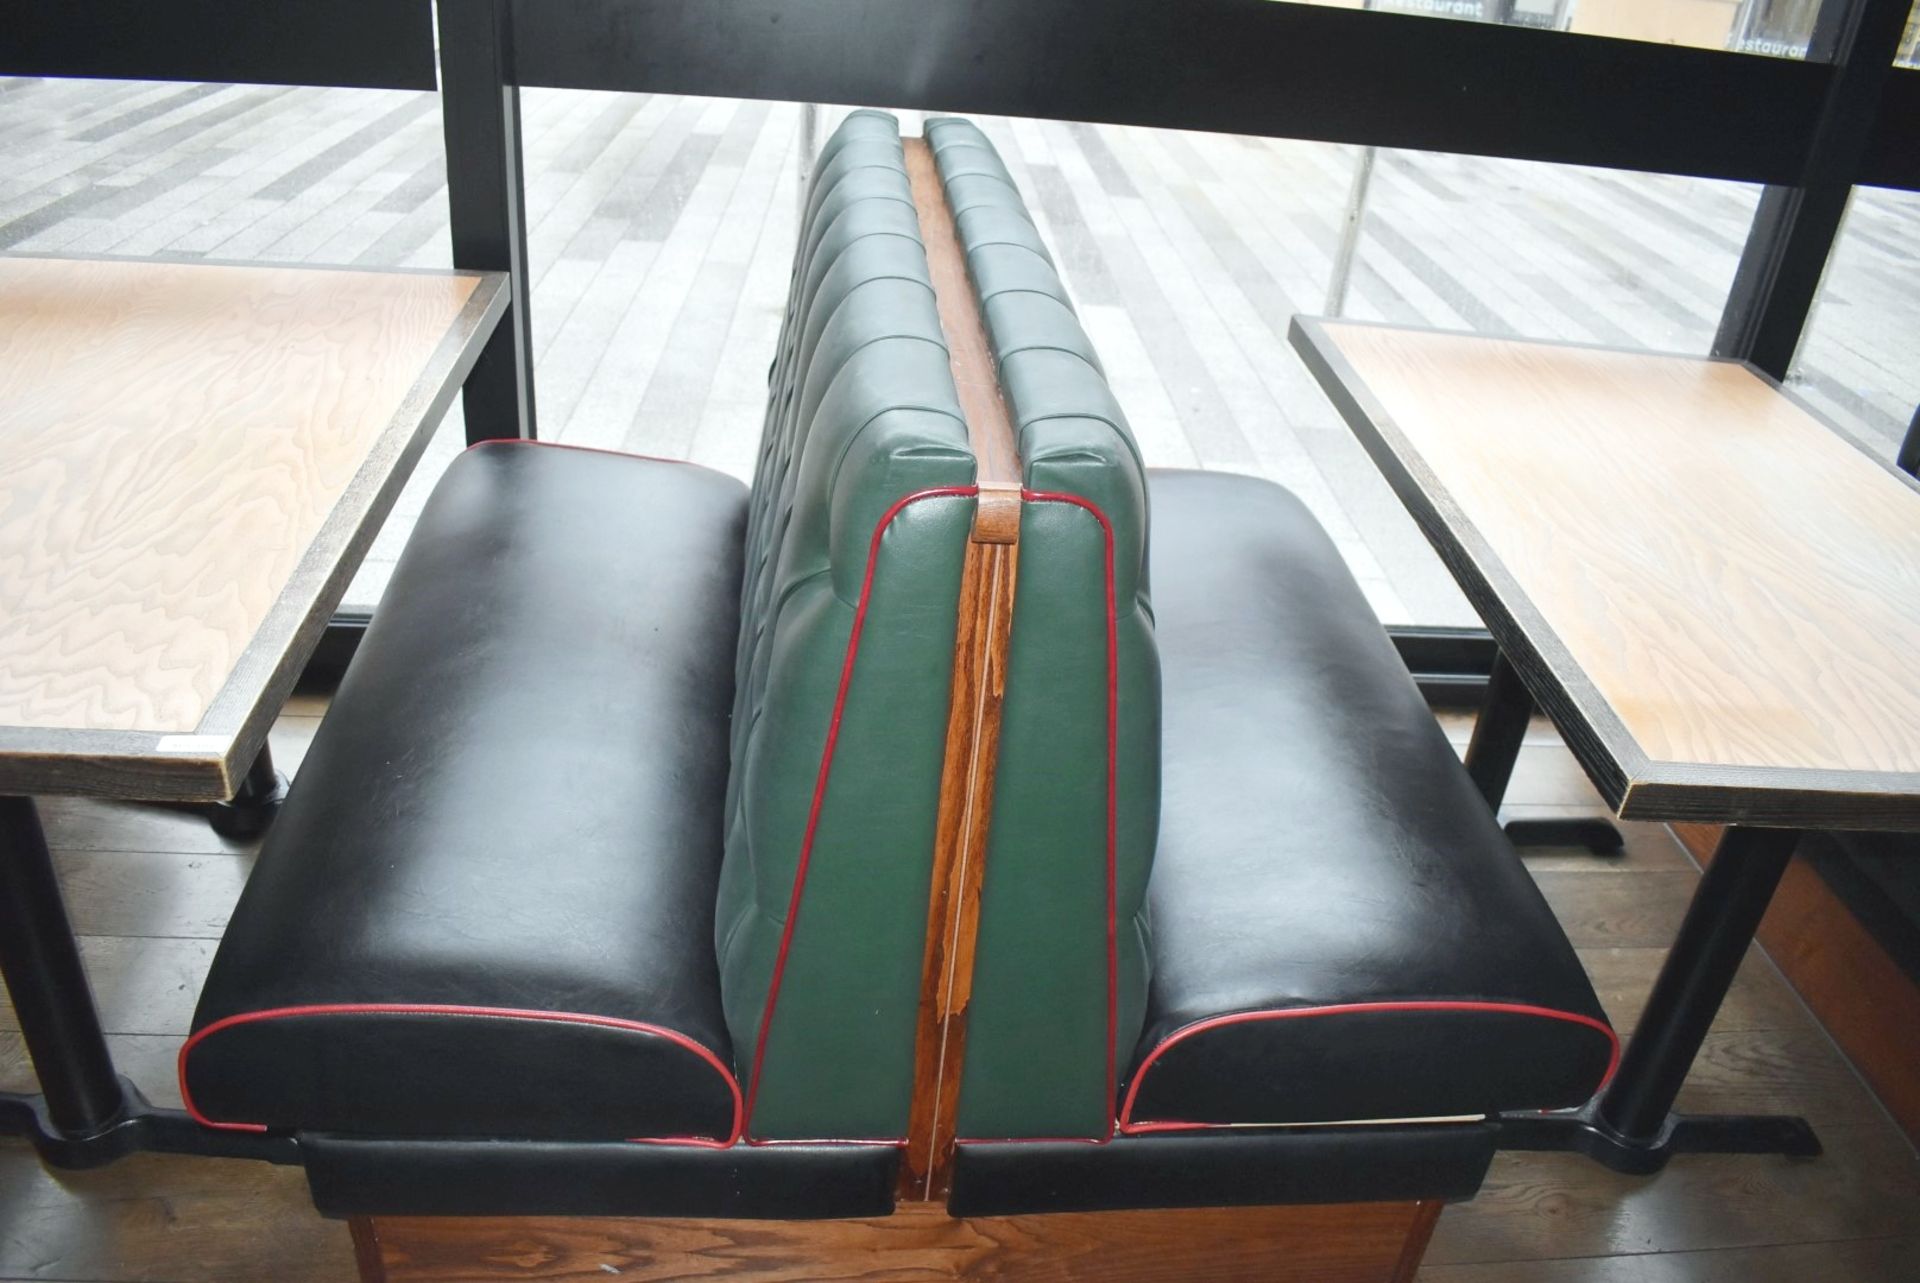 4 x Sections of Restaurant Double Booth Seating - Sits Up to 12 Persons - Green & Black Upholstery - Image 4 of 24